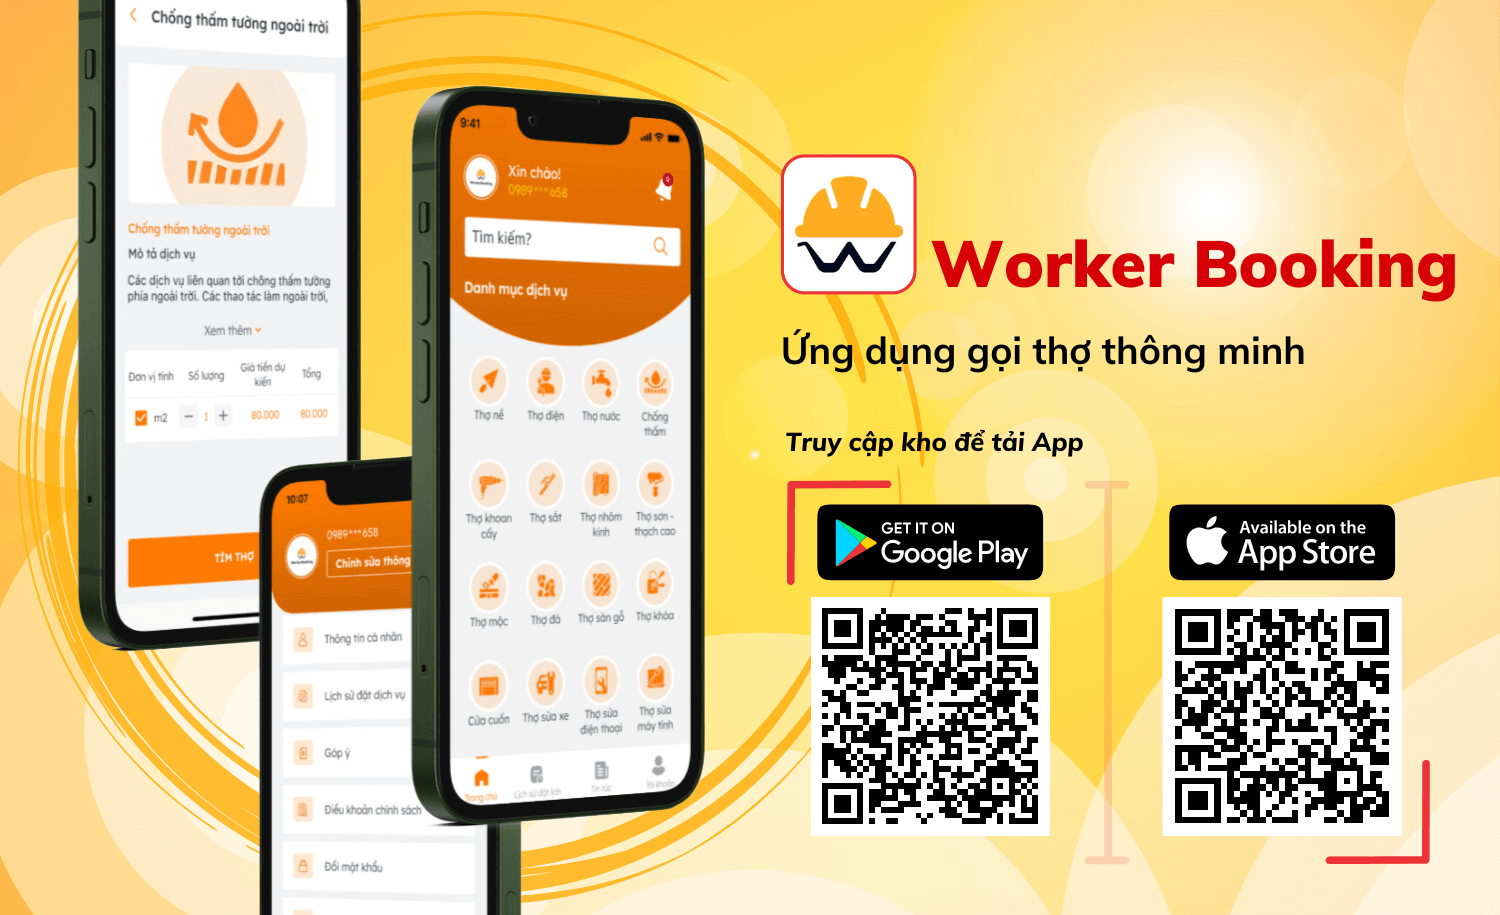 ung-dung-goi-tho-workerbooking